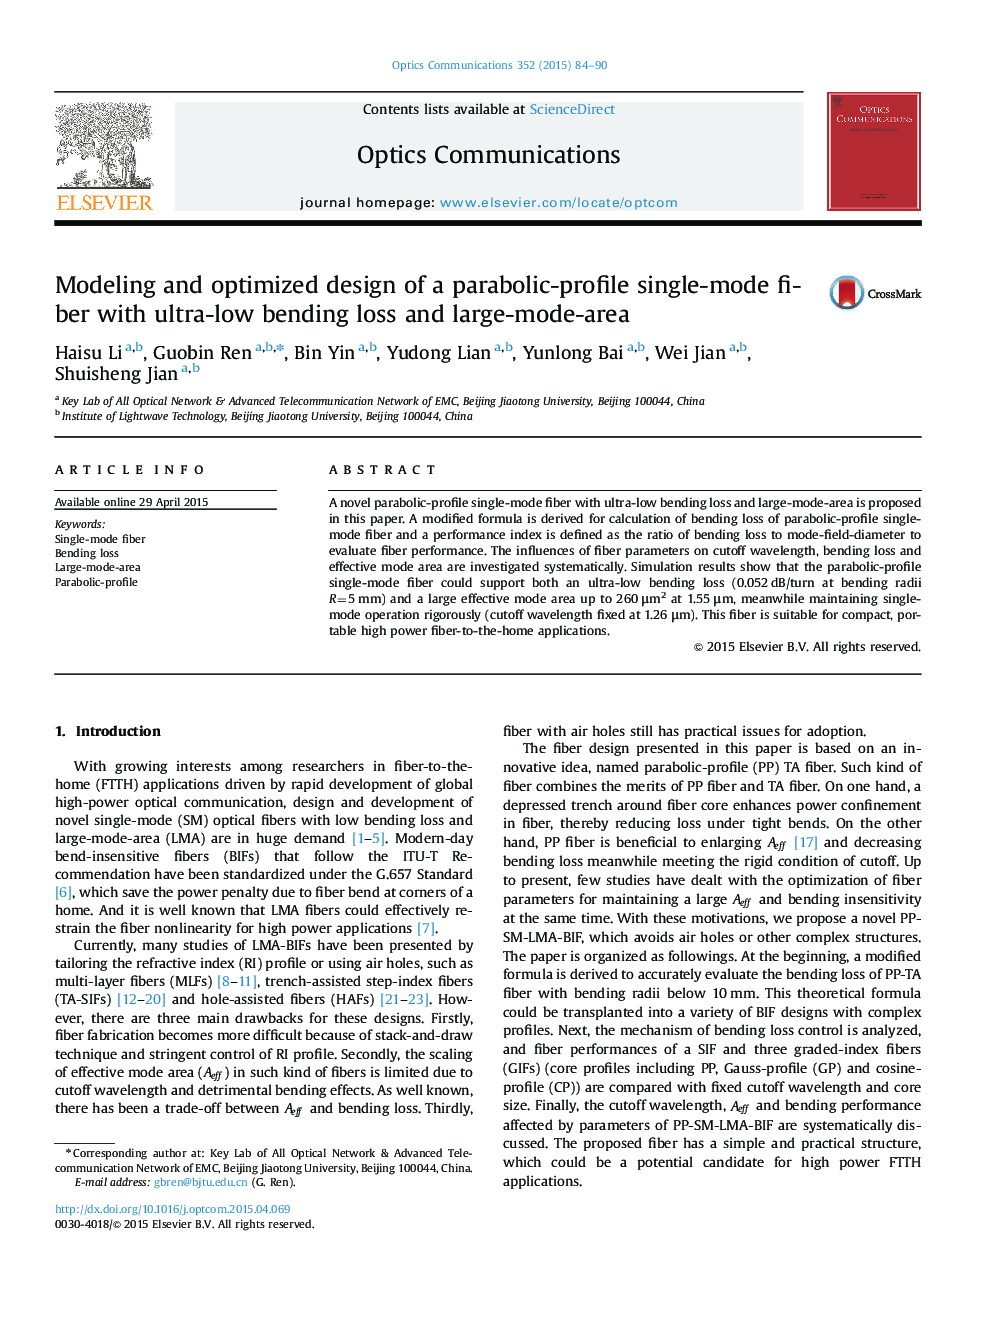 Modeling and optimized design of a parabolic-profile single-mode fiber with ultra-low bending loss and large-mode-area